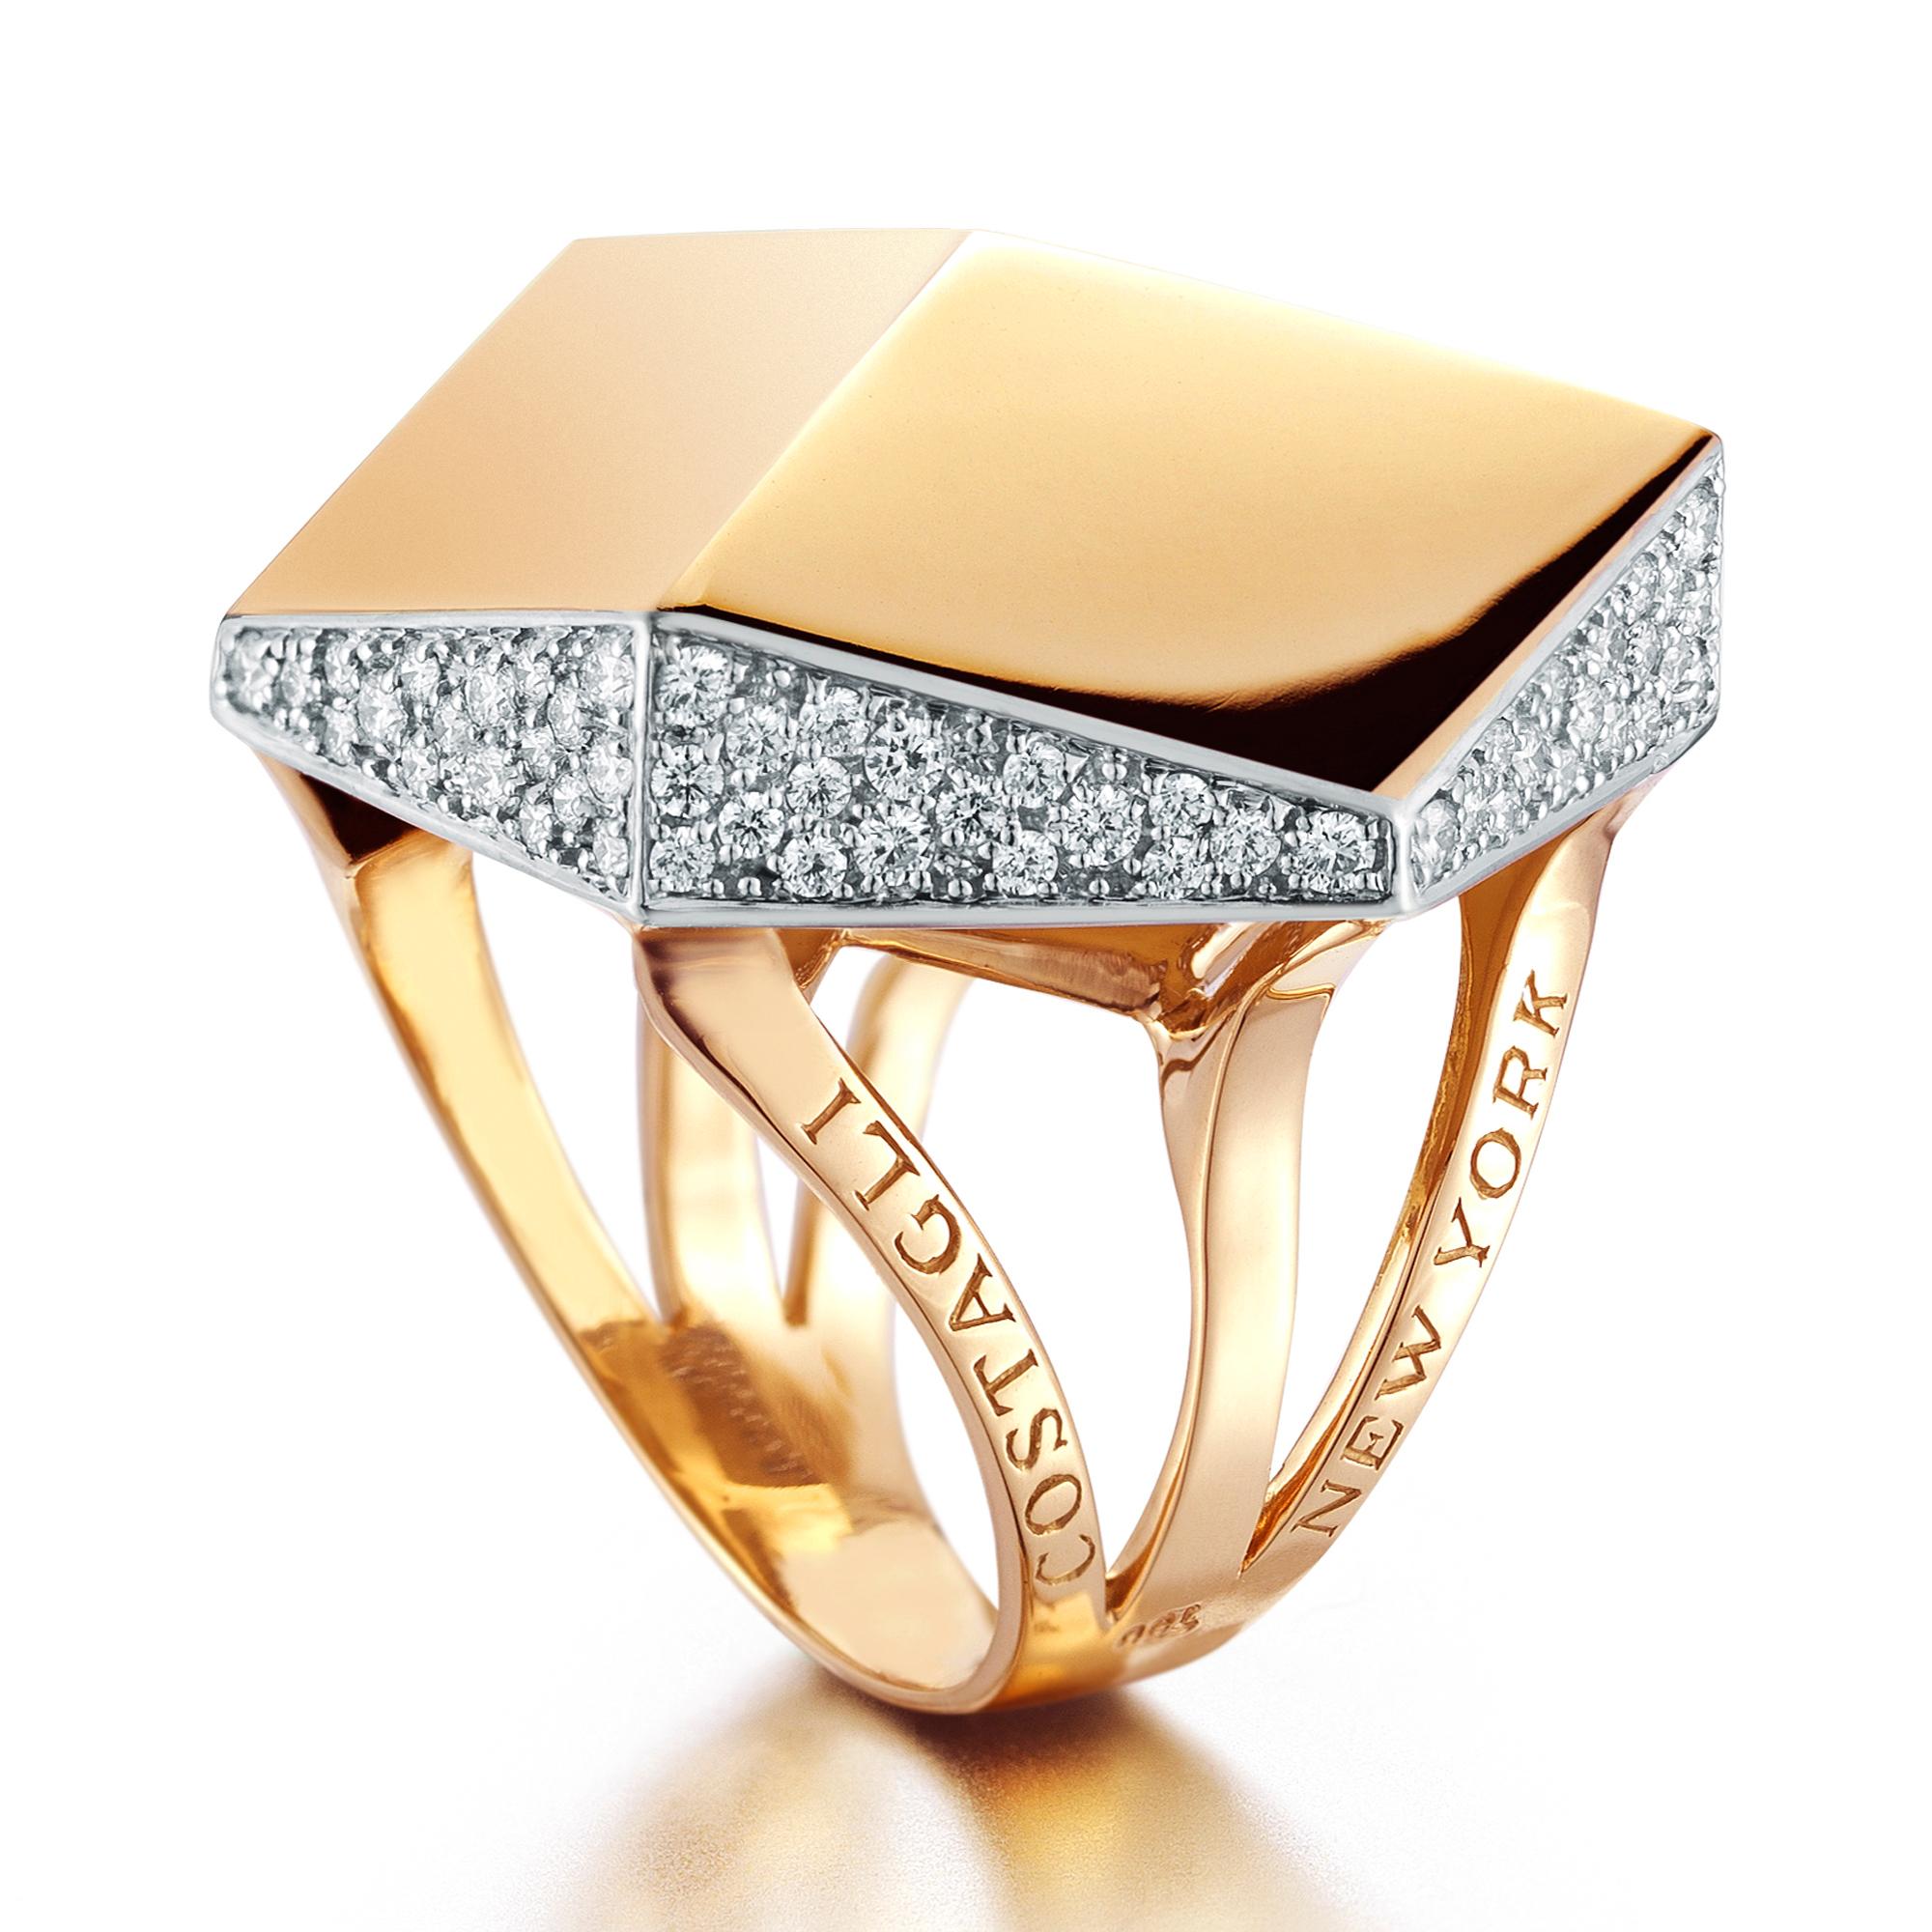 High polish 18kt rose gold cocktail ring from the Brillante® collection with diamond detail.

Translated from a quintessential Venetian motif, the Brillante® jewelry collection combines strong jewelry design, cutting edge technology and fine